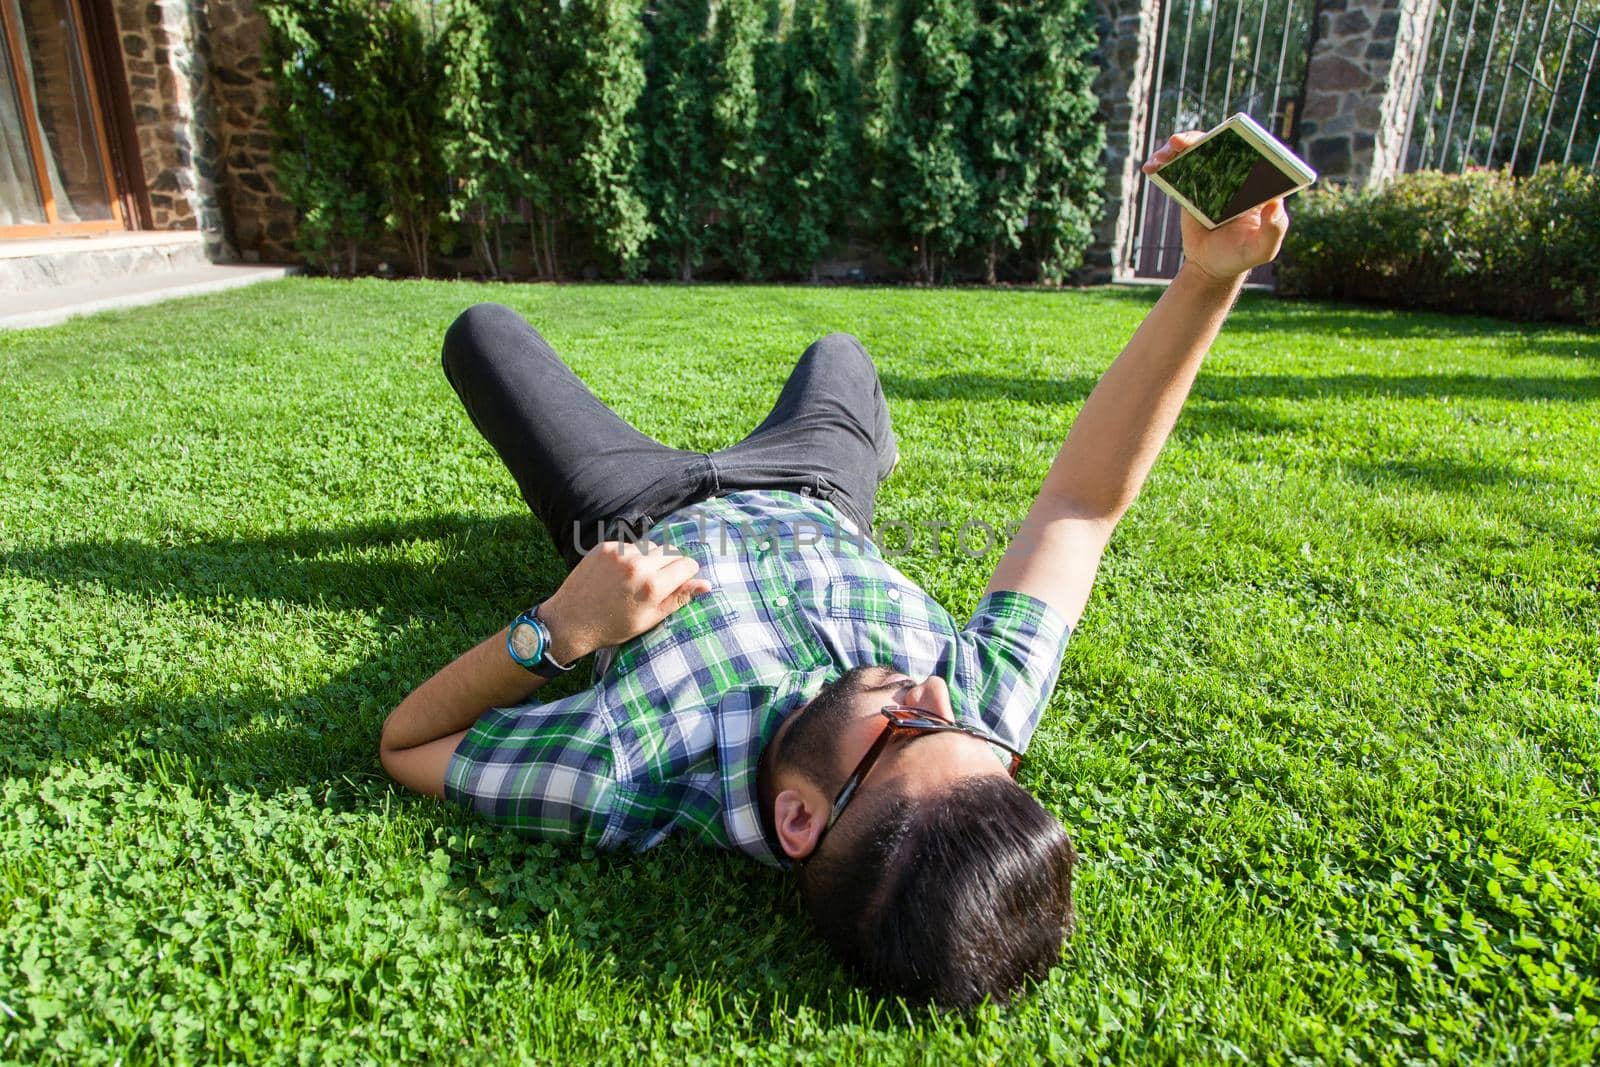 young man lie down on lawn and enjoying summertime.